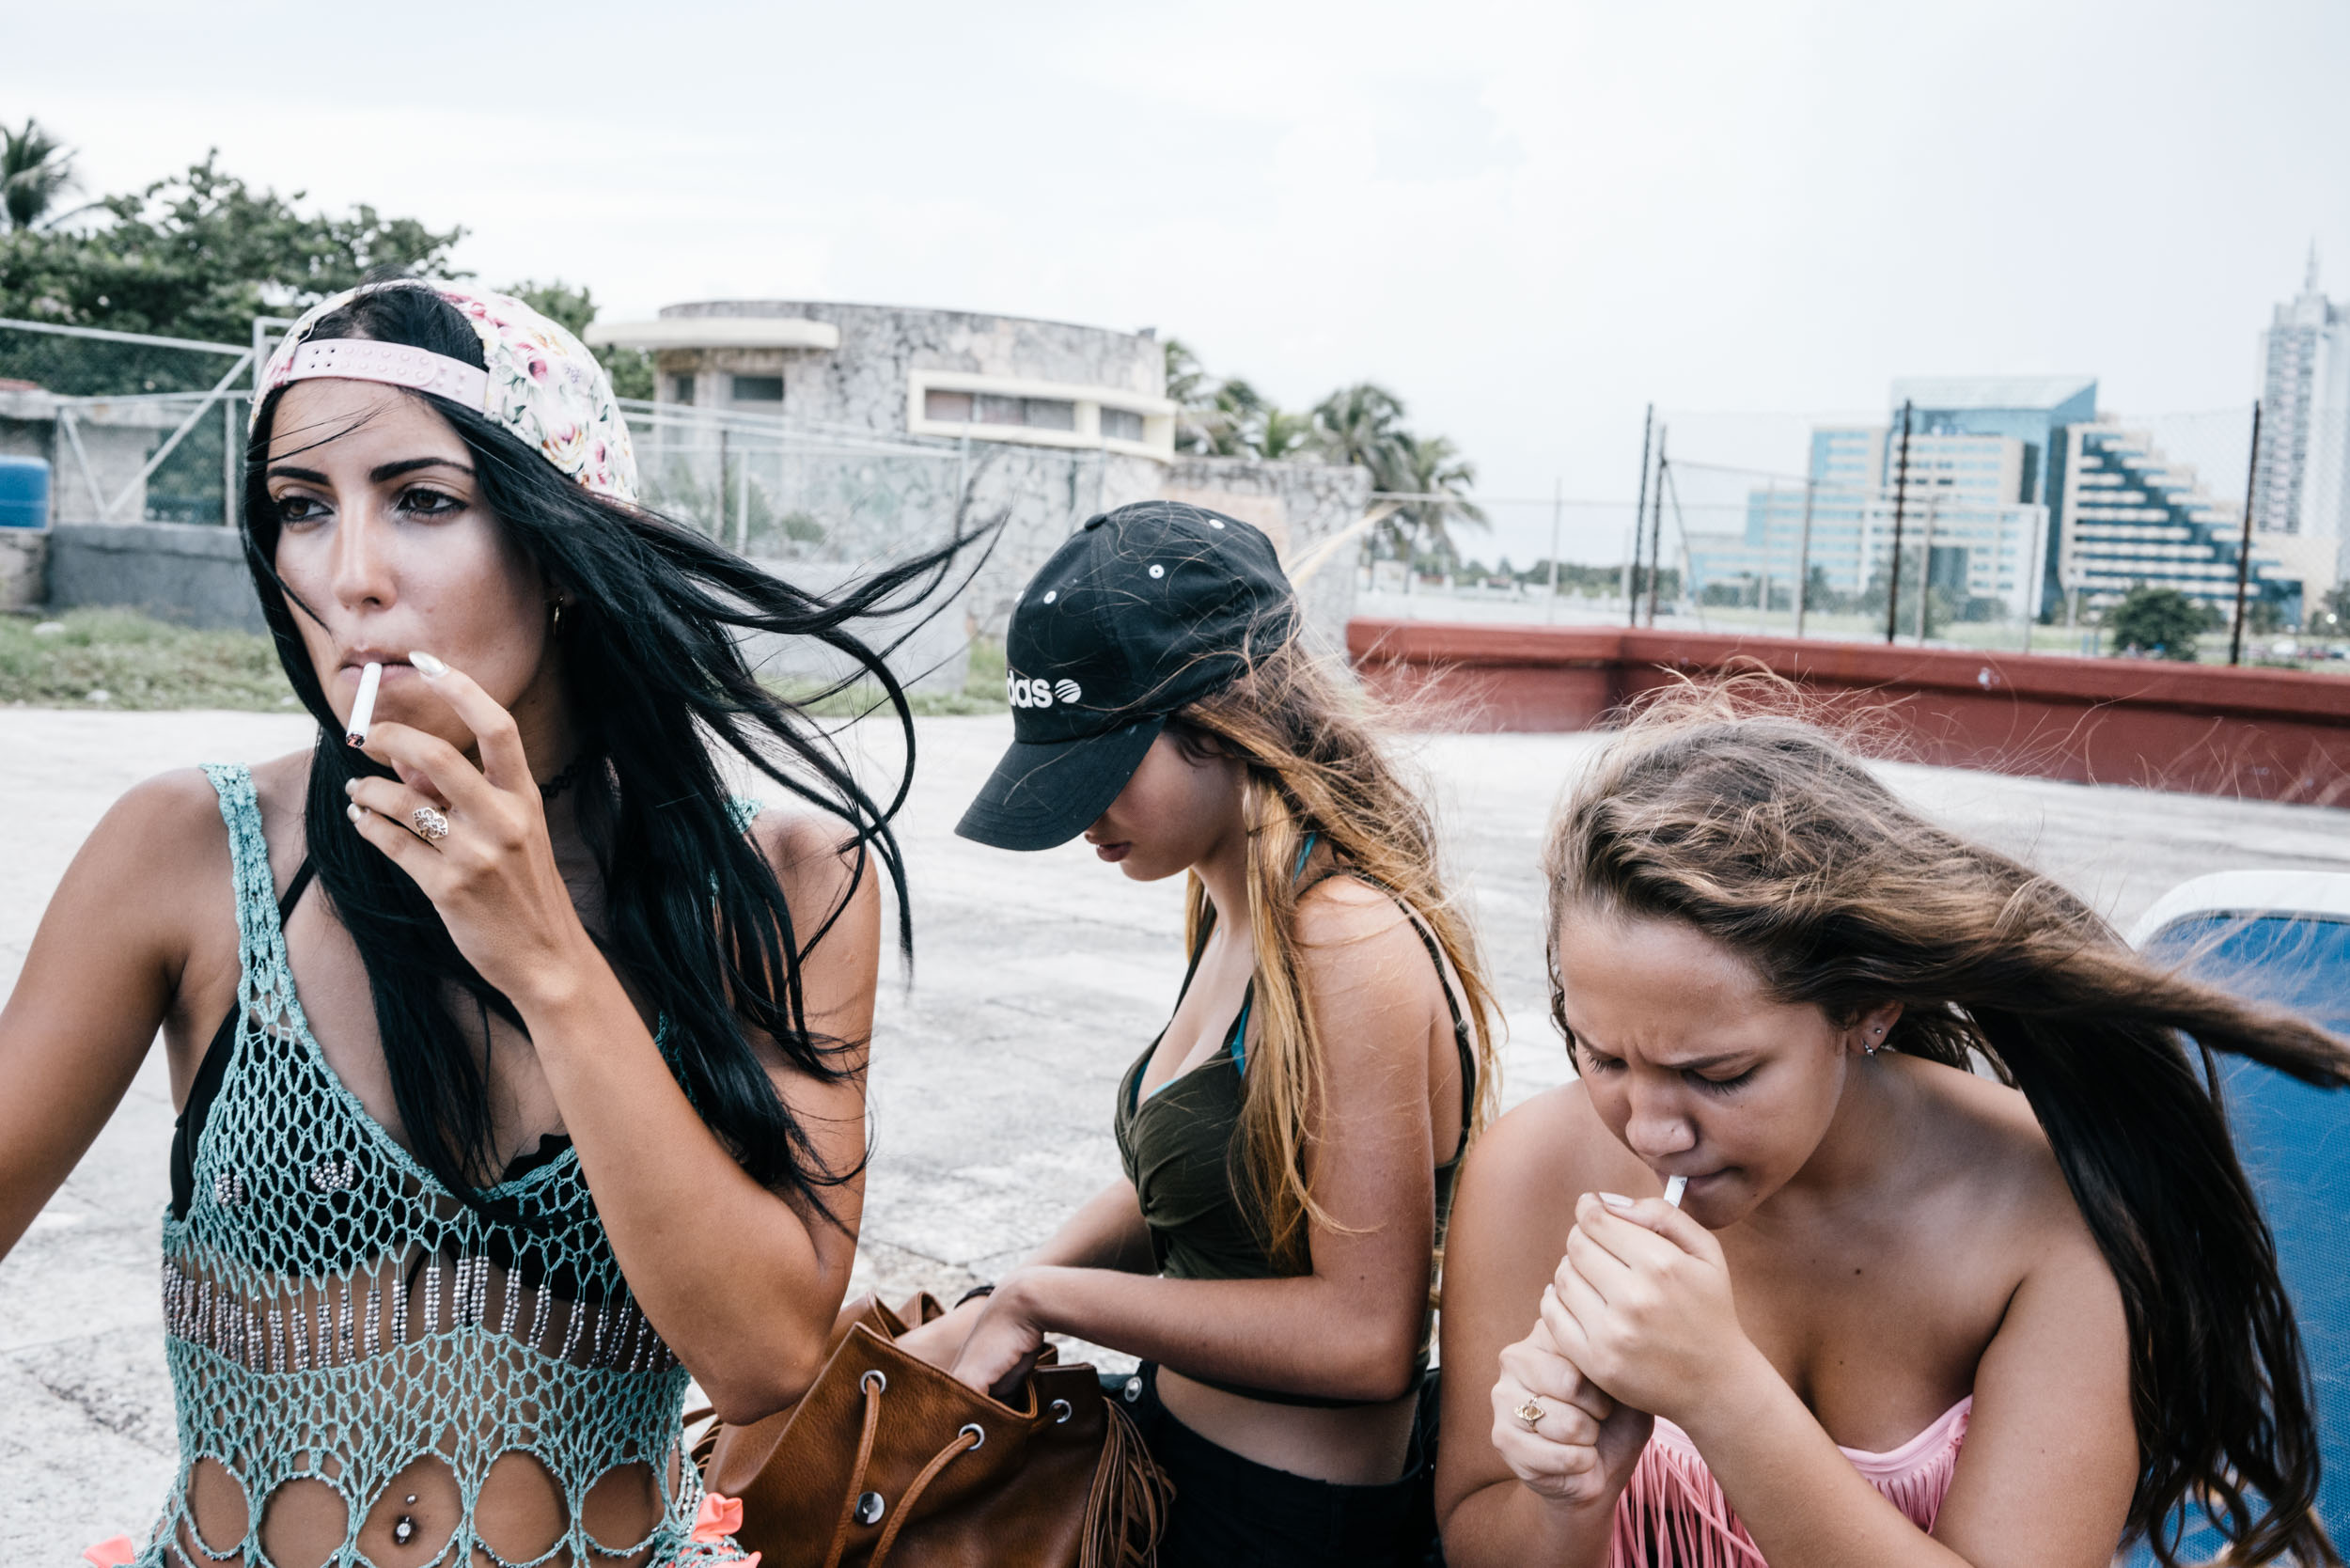 girls smoke at pool party in bathing suits